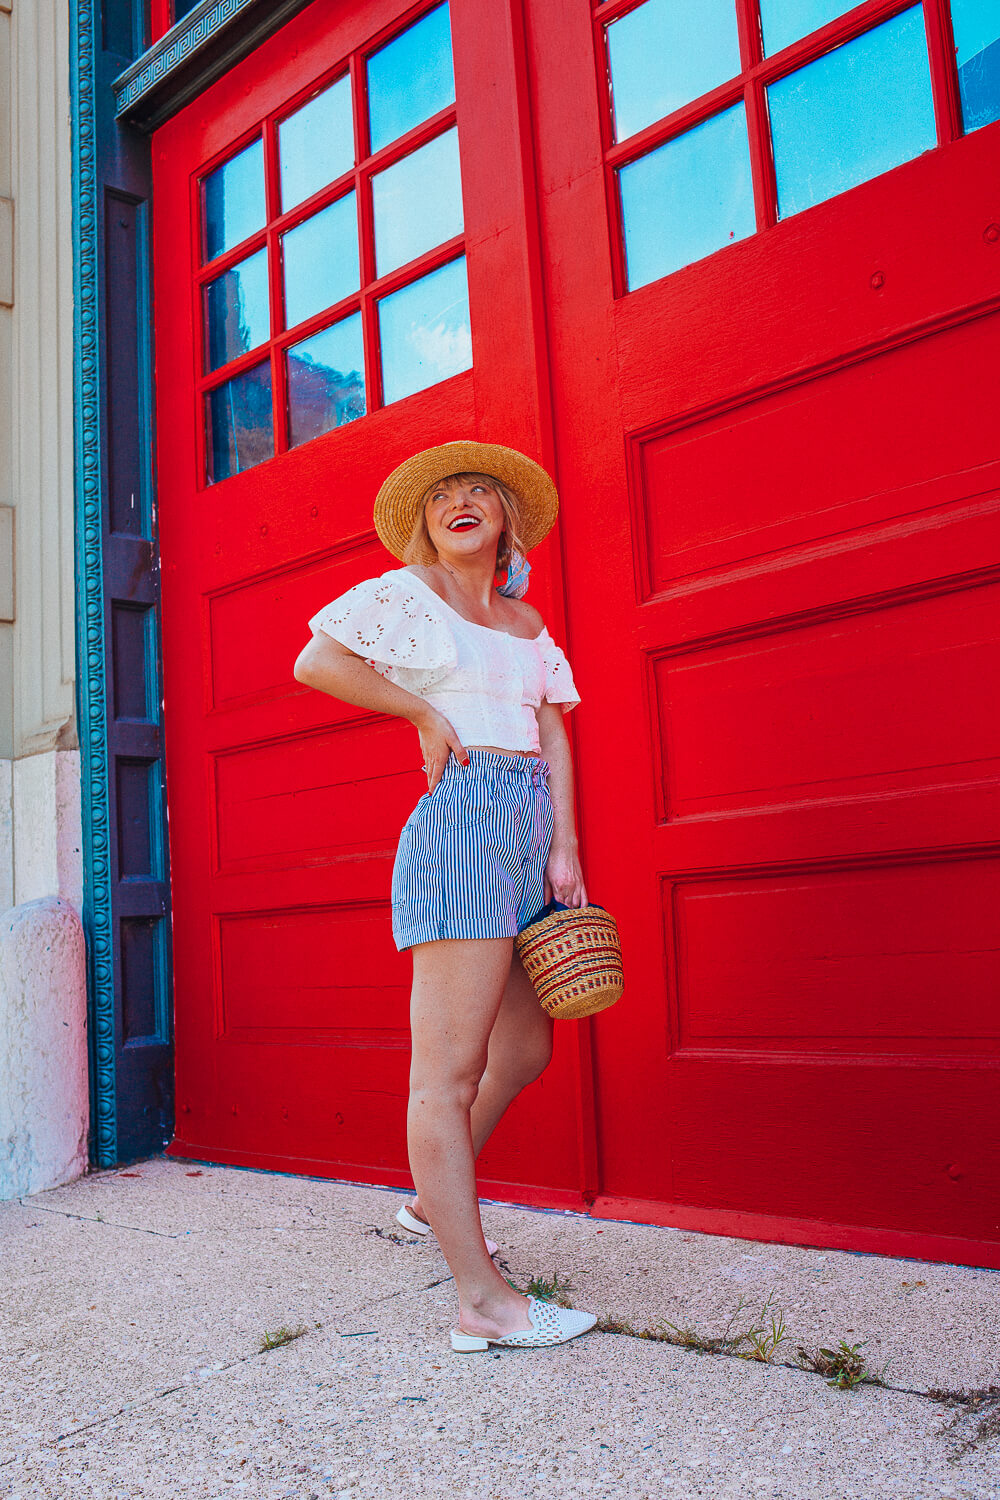 Outfit inspo for the Fourth of July 2019 - chic inspiration to